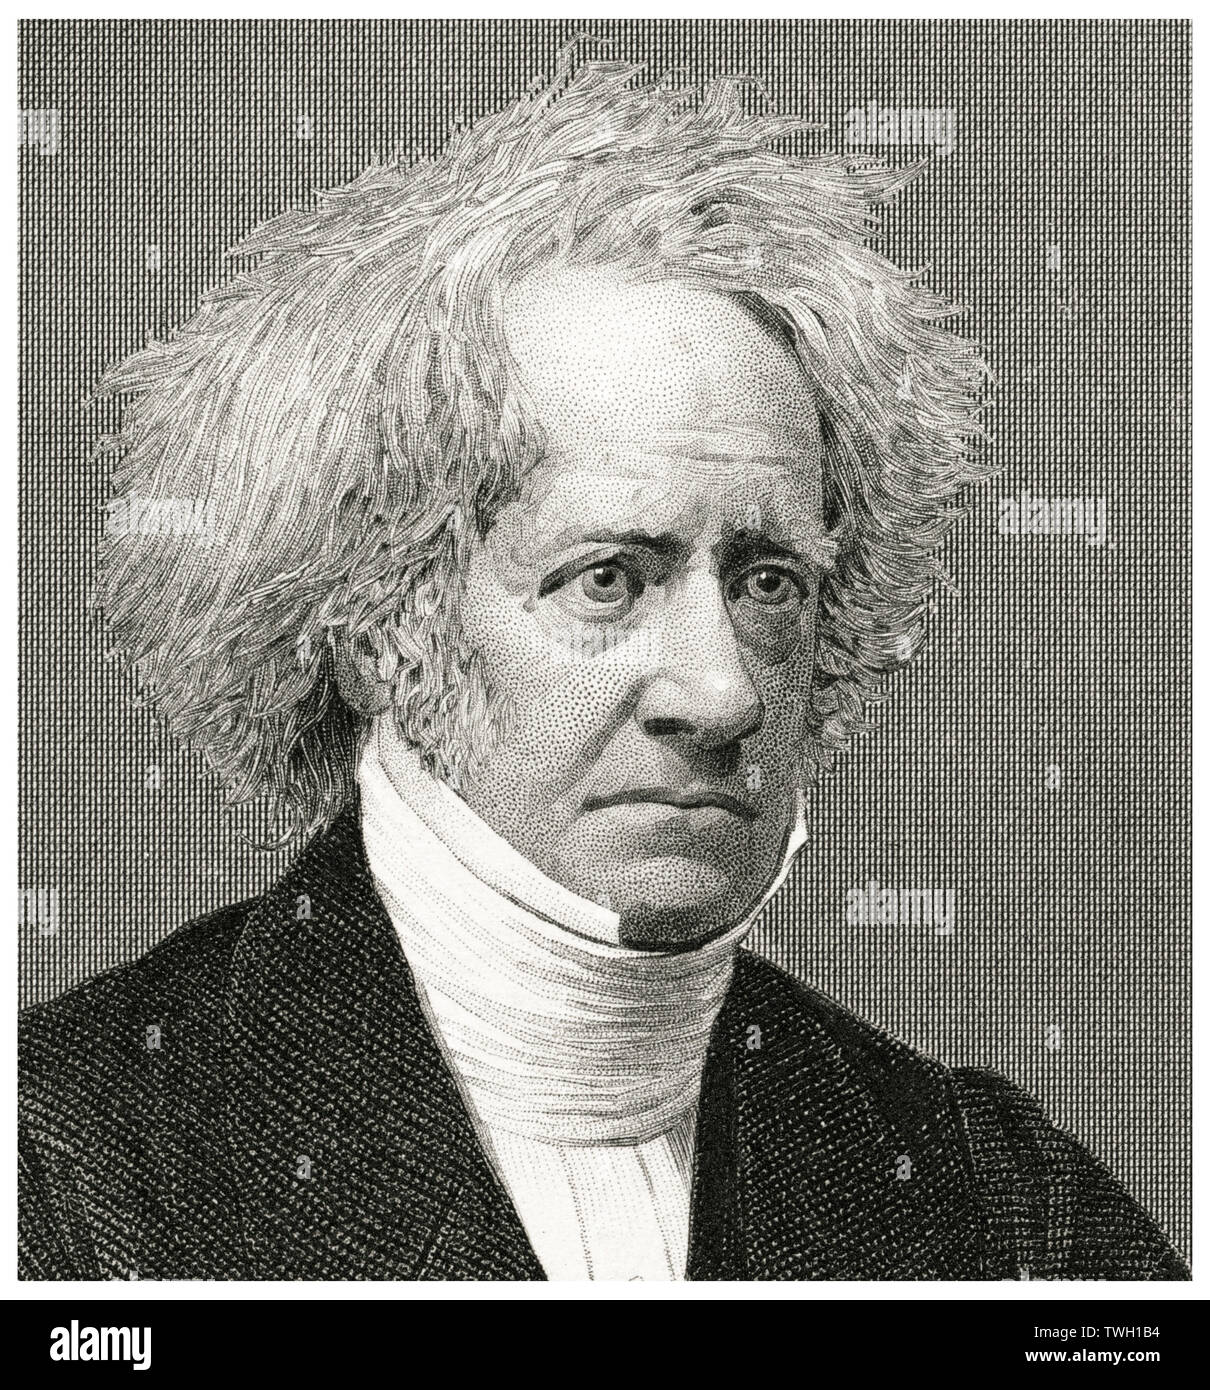 Sir John Frederick William Herschel, 1st Baronet (1792-1871), English Polymath who Invented the Blue Print, Head and Shoulders Portrait, Steel Engraving, Portrait Gallery of Eminent Men and Women of Europe and America by Evert A. Duyckinck, Published by Henry J. Johnson, Johnson, Wilson & Company, New York, 1873 Stock Photo